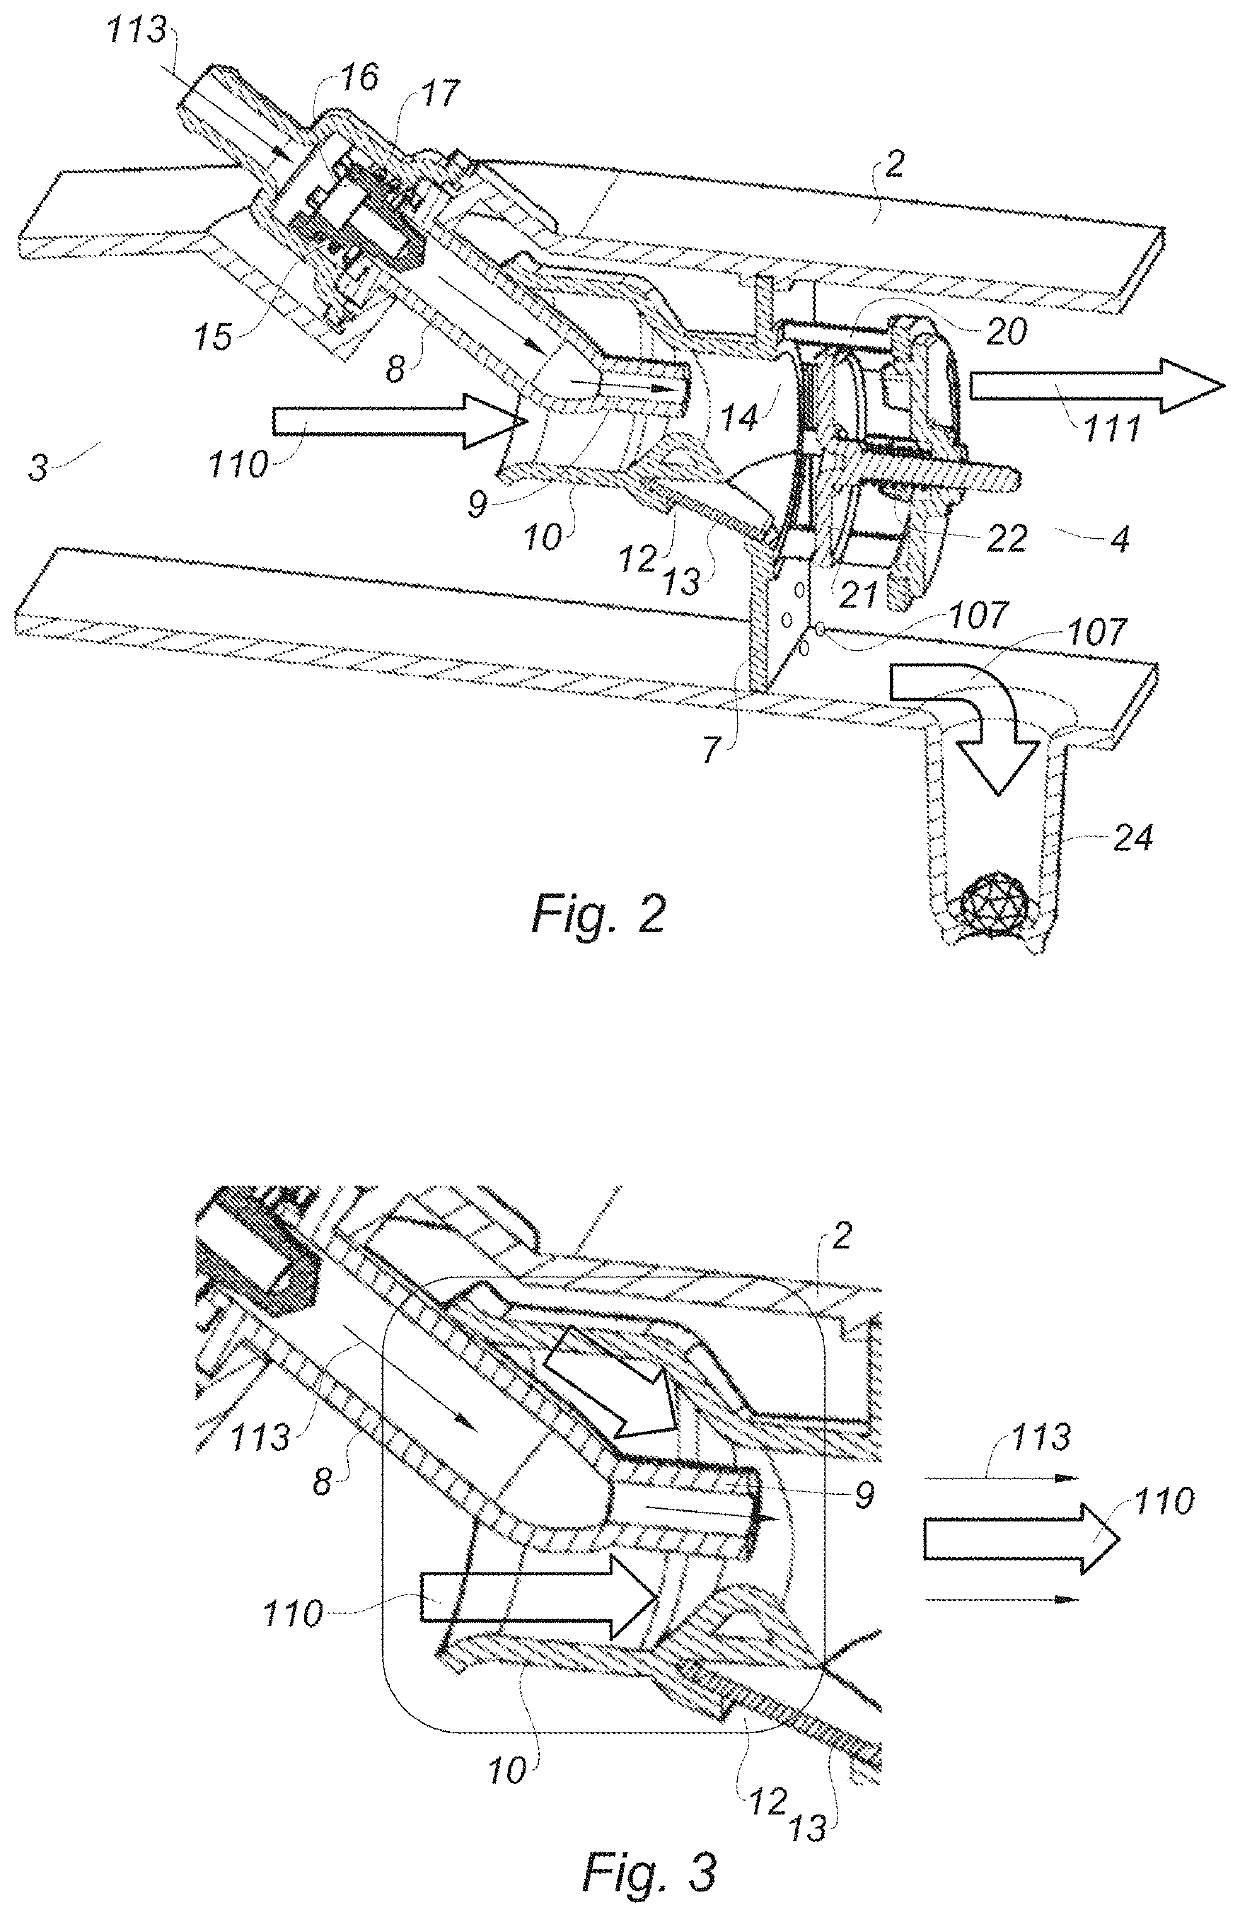 Oil decantation system for an internal combustion engine